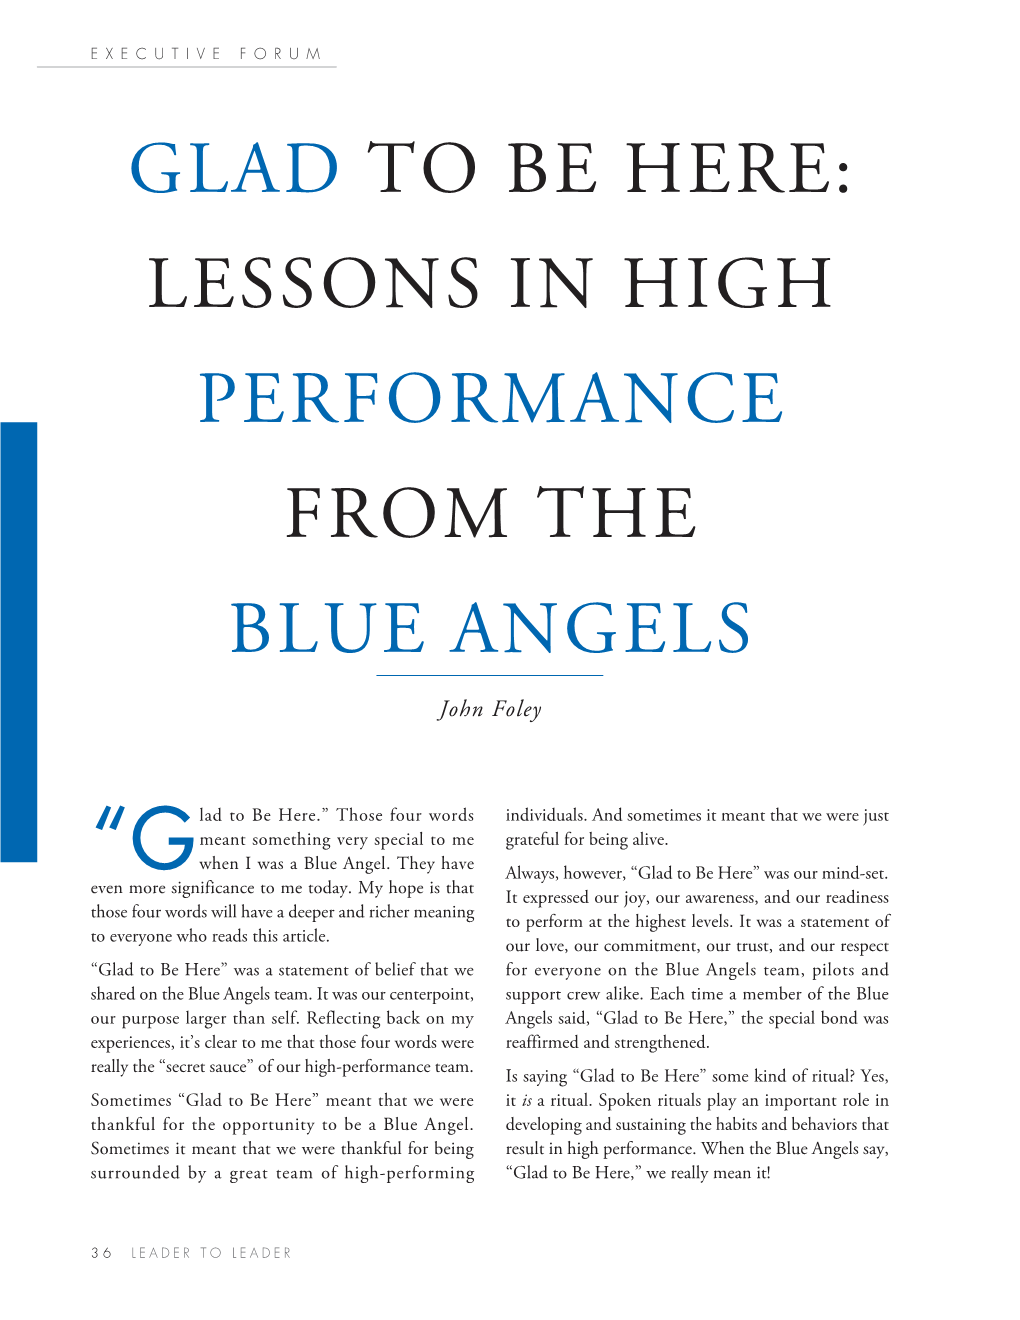 GLAD to BE HERE: LESSONS in HIGH PERFORMANCE from the BLUE ANGELS John Foley